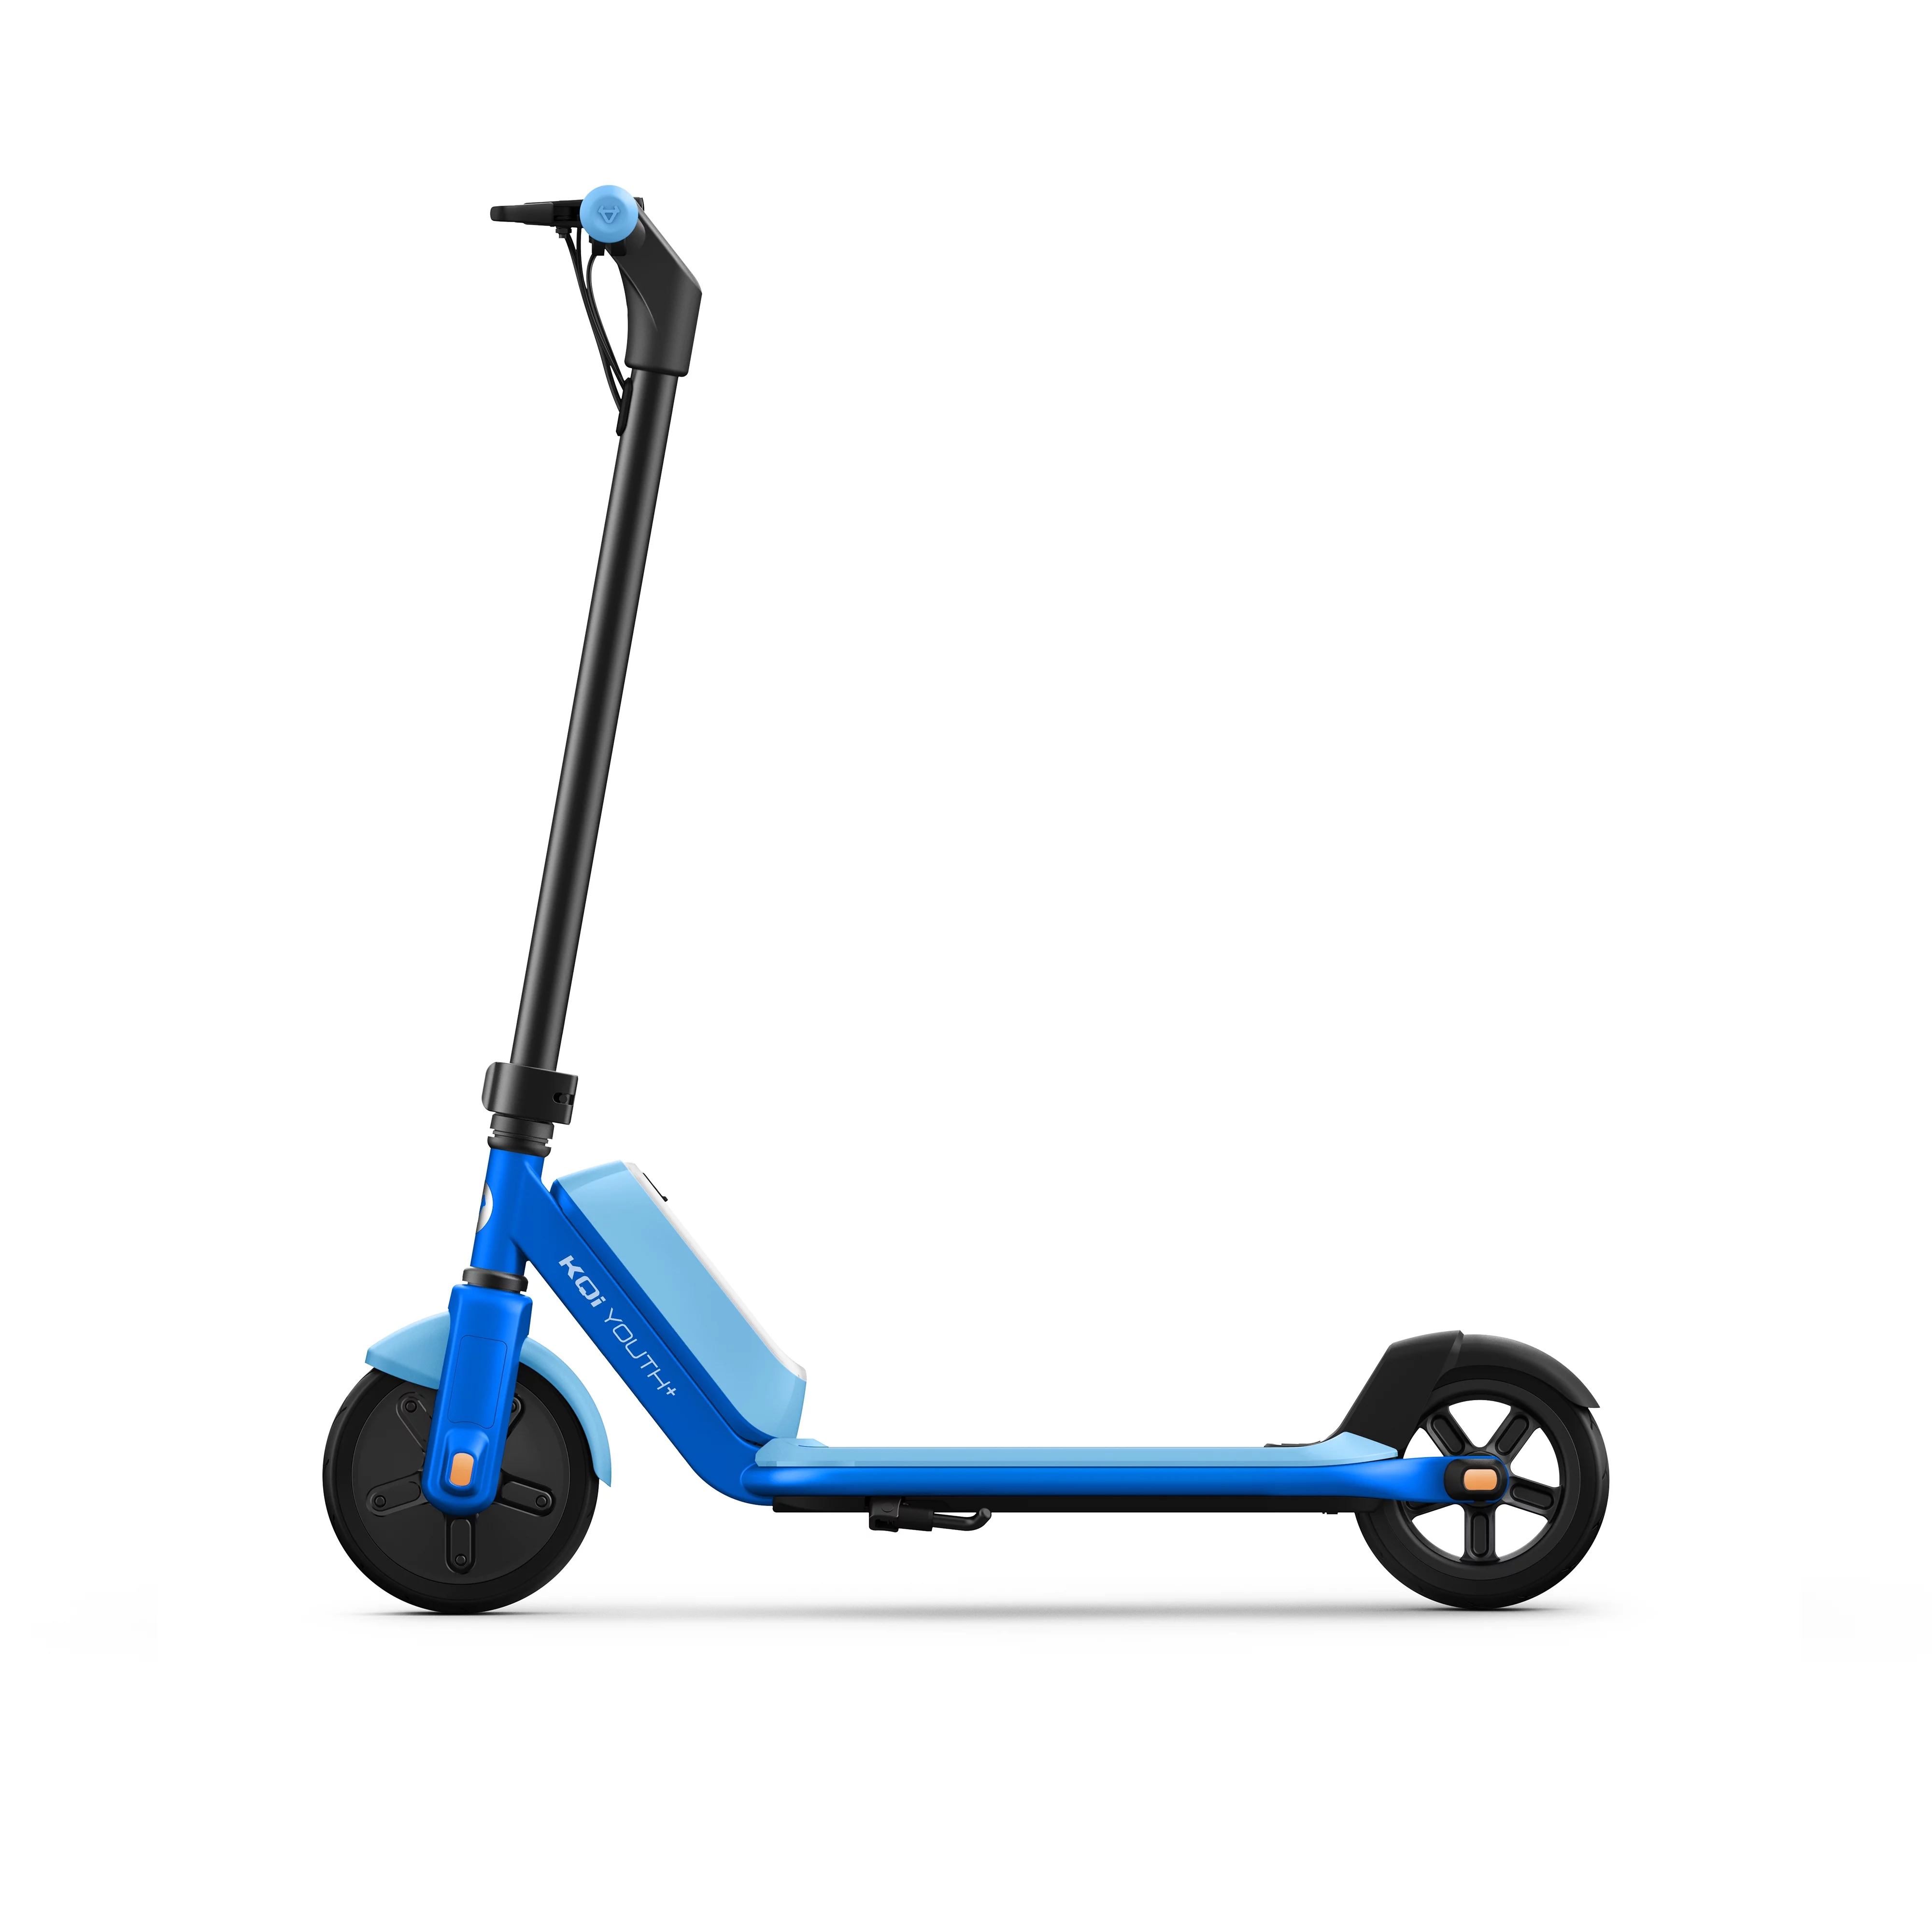 NIU KQi Youth+ Electric Scooter for Kids Ages 8-14 up to 70 Mins Riding Time 9-in-1 Ambient Lights Automotive Grade Steel Frame Blue